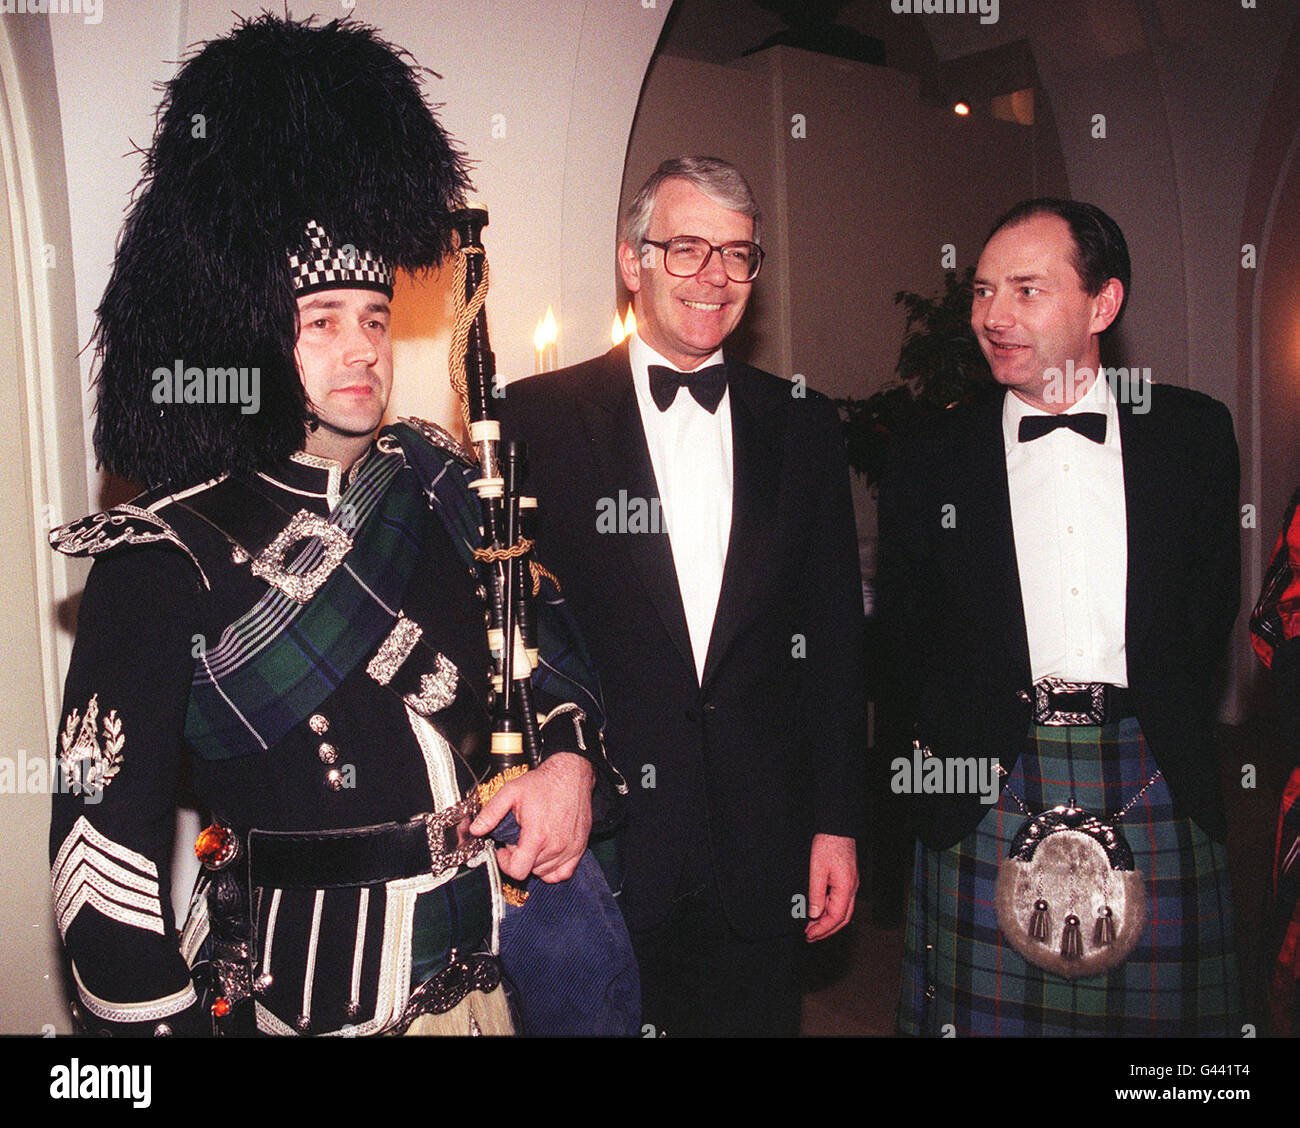 Prime Minister John Major (centre) with Scottish Secretary Michael Forsyth and piper Callum Watson, of Dumfries and Galloway Police Band, at a dinner at Banqueting House honouring the bicentenary of the death of philosopher and poet Robert Burns. Stock Photo